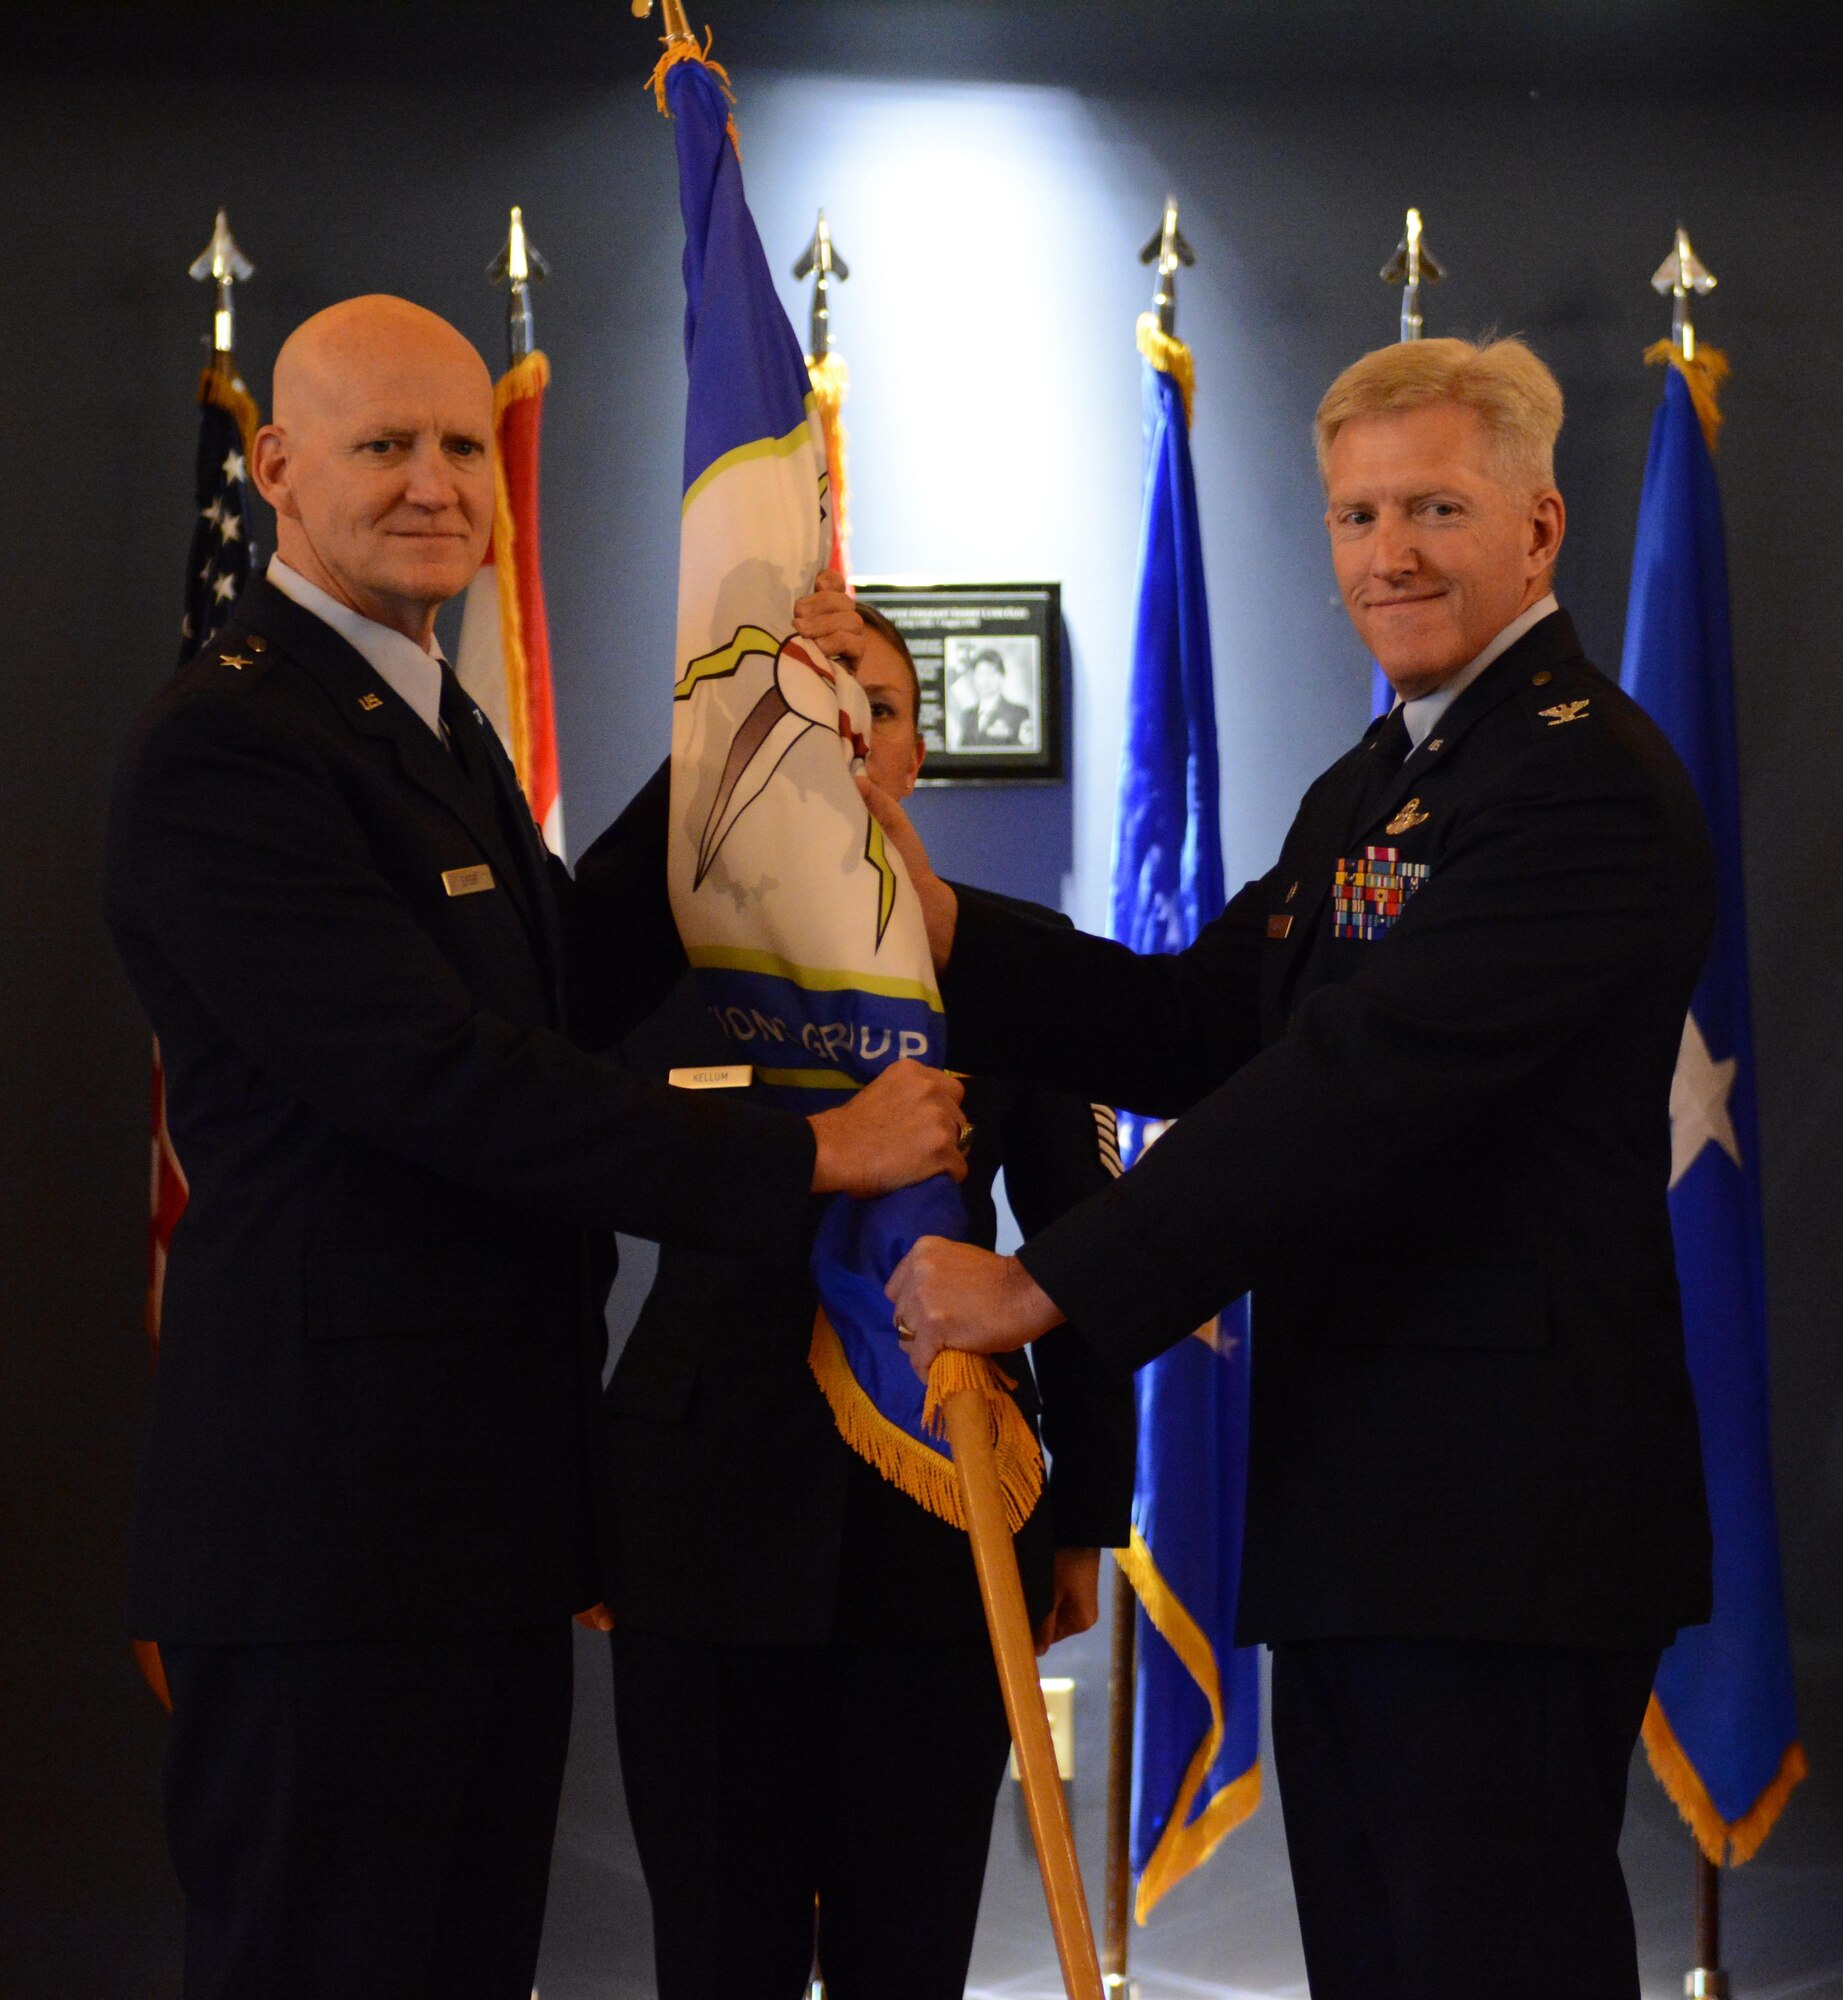 Col. Brian K. Johnson, former 101st Air and Space Operations Group commander, passes the ceremonial flag to Brig. Gen. Jim Eifert, Florida Air National Guard commander, during the change of command ceremony at Tyndall Air Force Base, Florida Jan. 5. The passing of the flag symbolizes Johnson's passing of command.